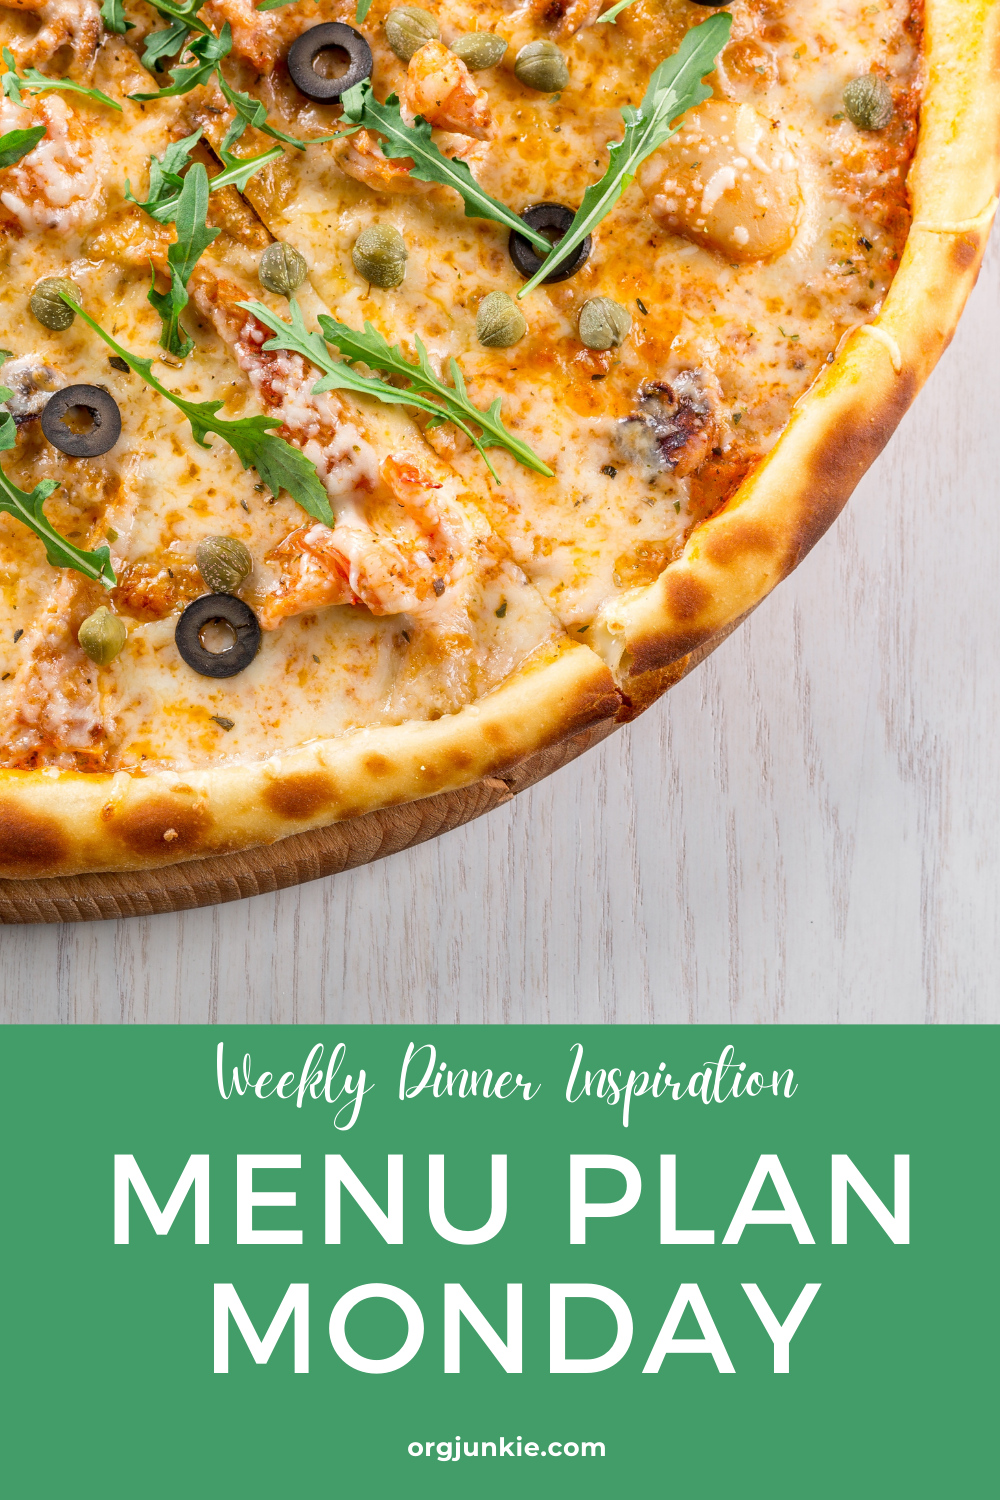 Menu Plan Monday for the week of Nov 2/20 ~ weekly dinner inspiration at I'm an Organizing Junkie